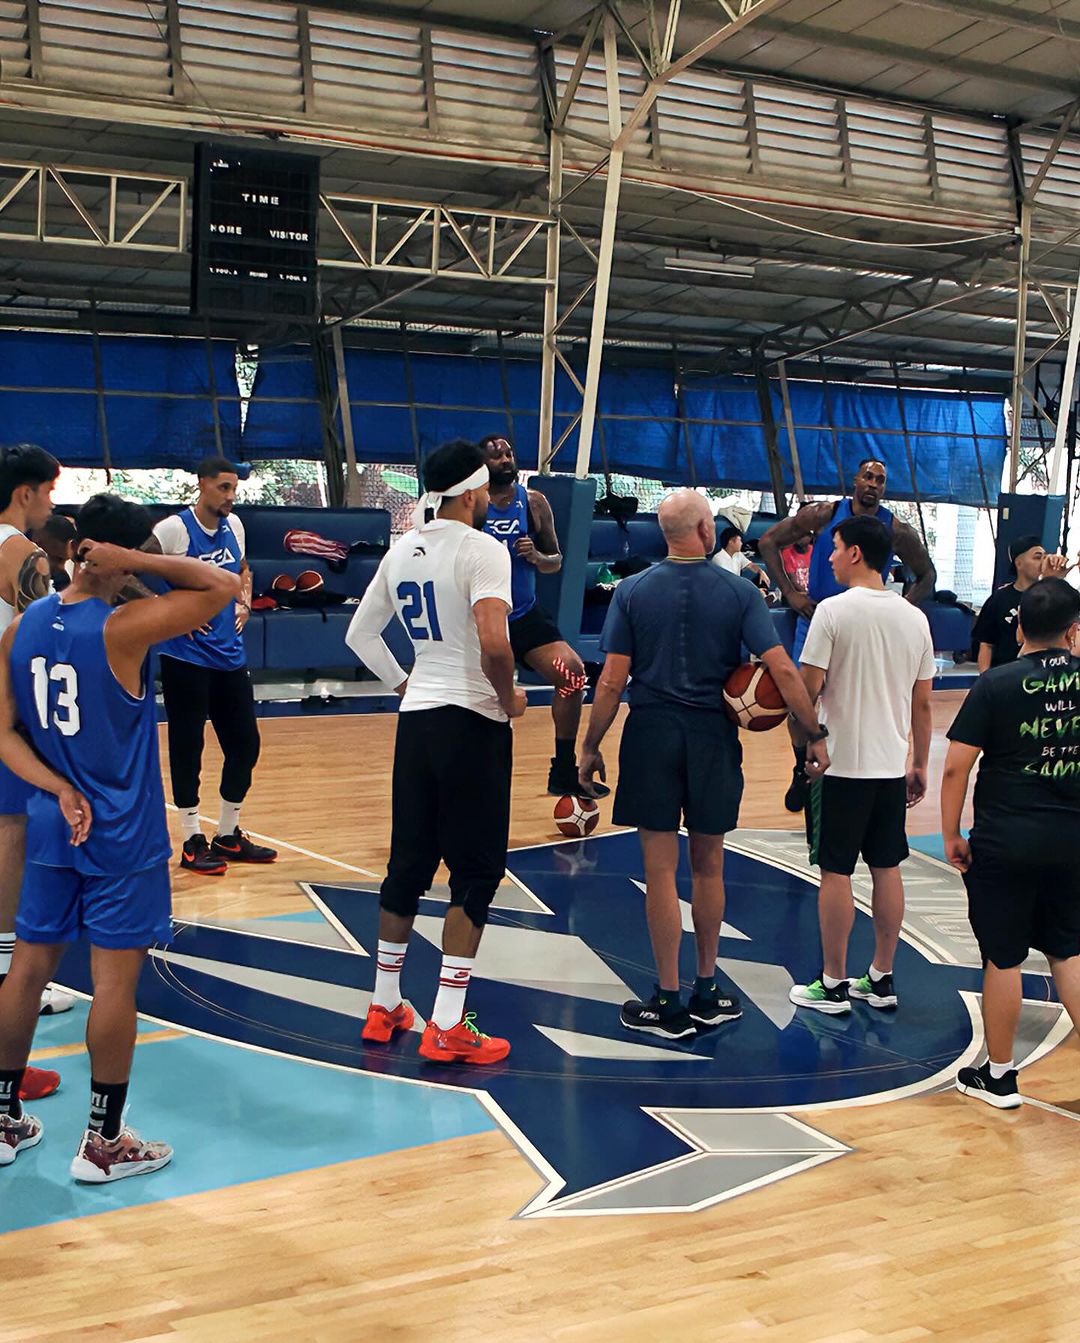 Strong Group Athletics team including Dwight Howard playing in the Philippines in preparation for the Dubai International Basketball Championship